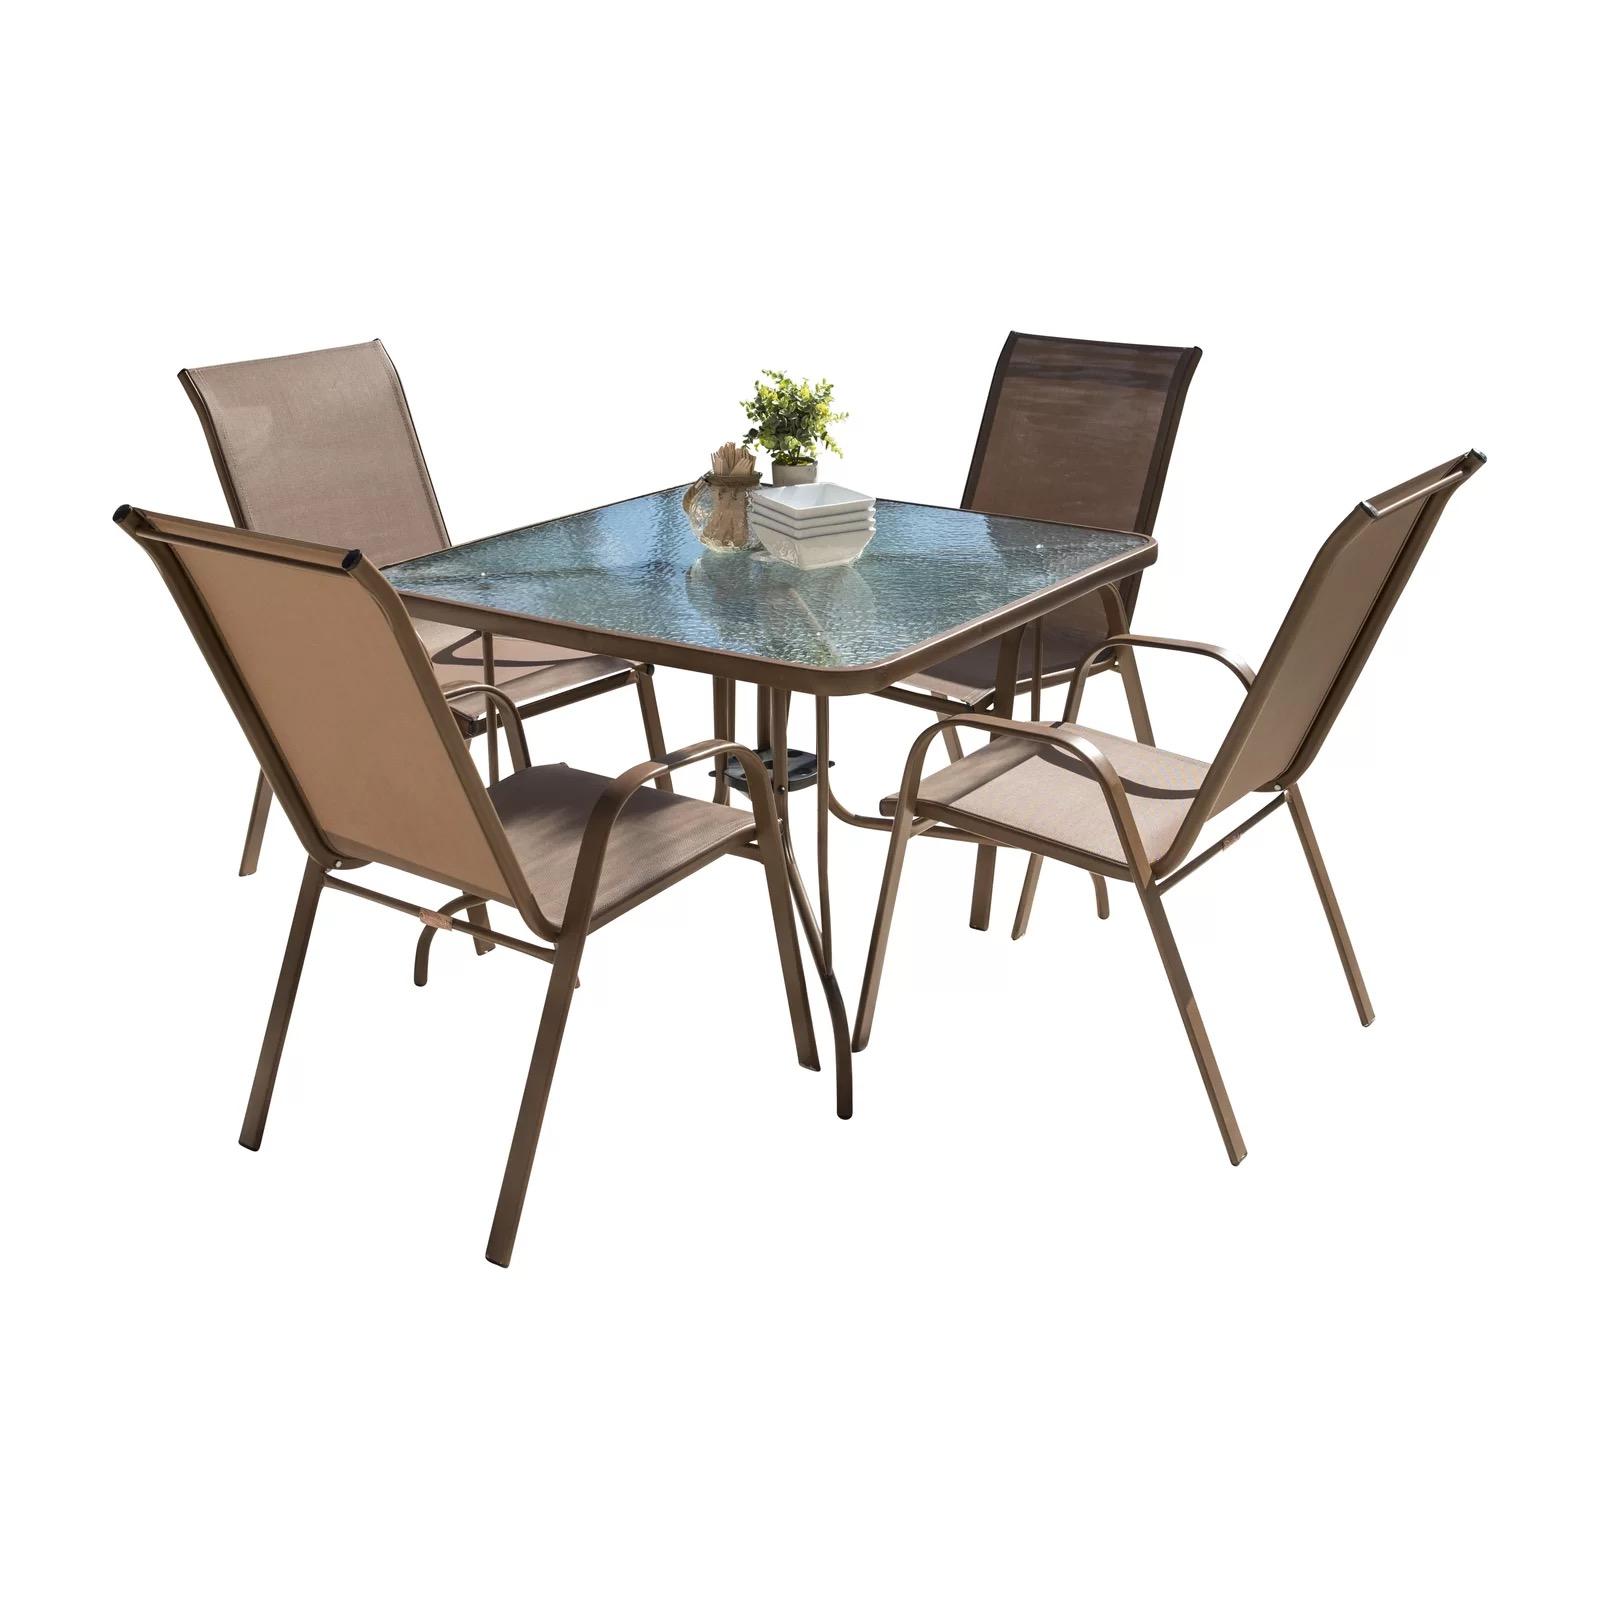 Classic Outdoors Dining Set Café PJO-9001-ESP-5DH in Brown 